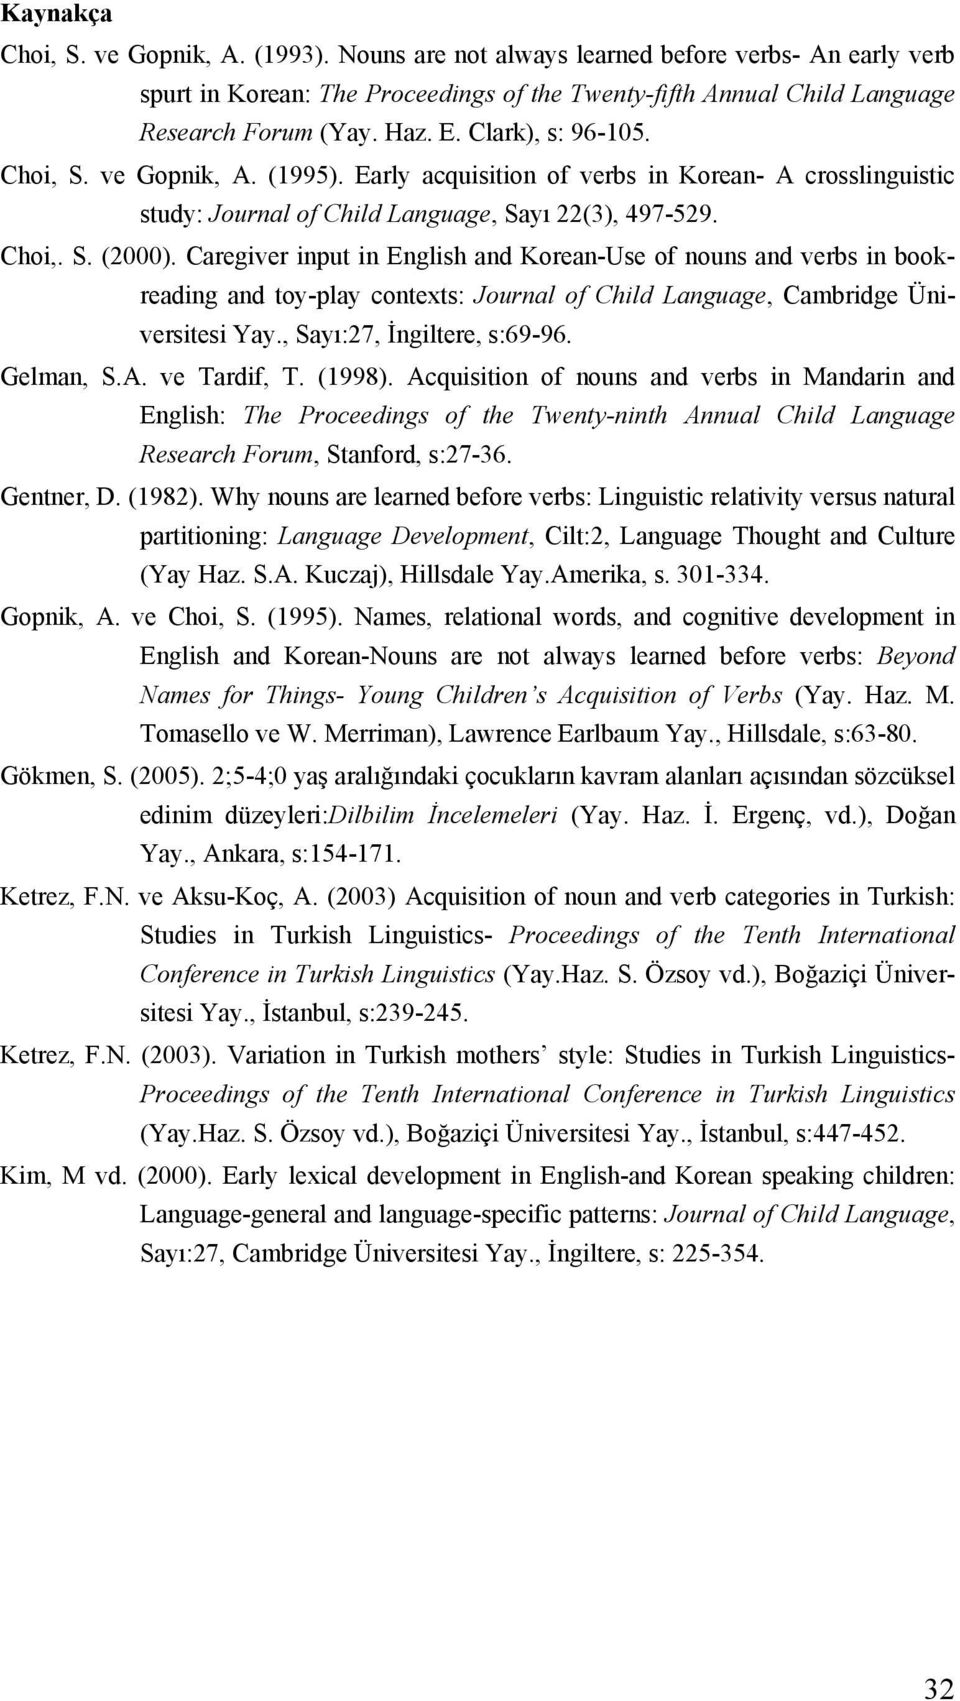 Caregiver input in English and Korean-Use of nouns and verbs in bookreading and toy-play contexts: Journal of Child Language, Cambridge Üniversitesi Yay., Sayı:27, İngiltere, s:69-96. Gelman, S.A.